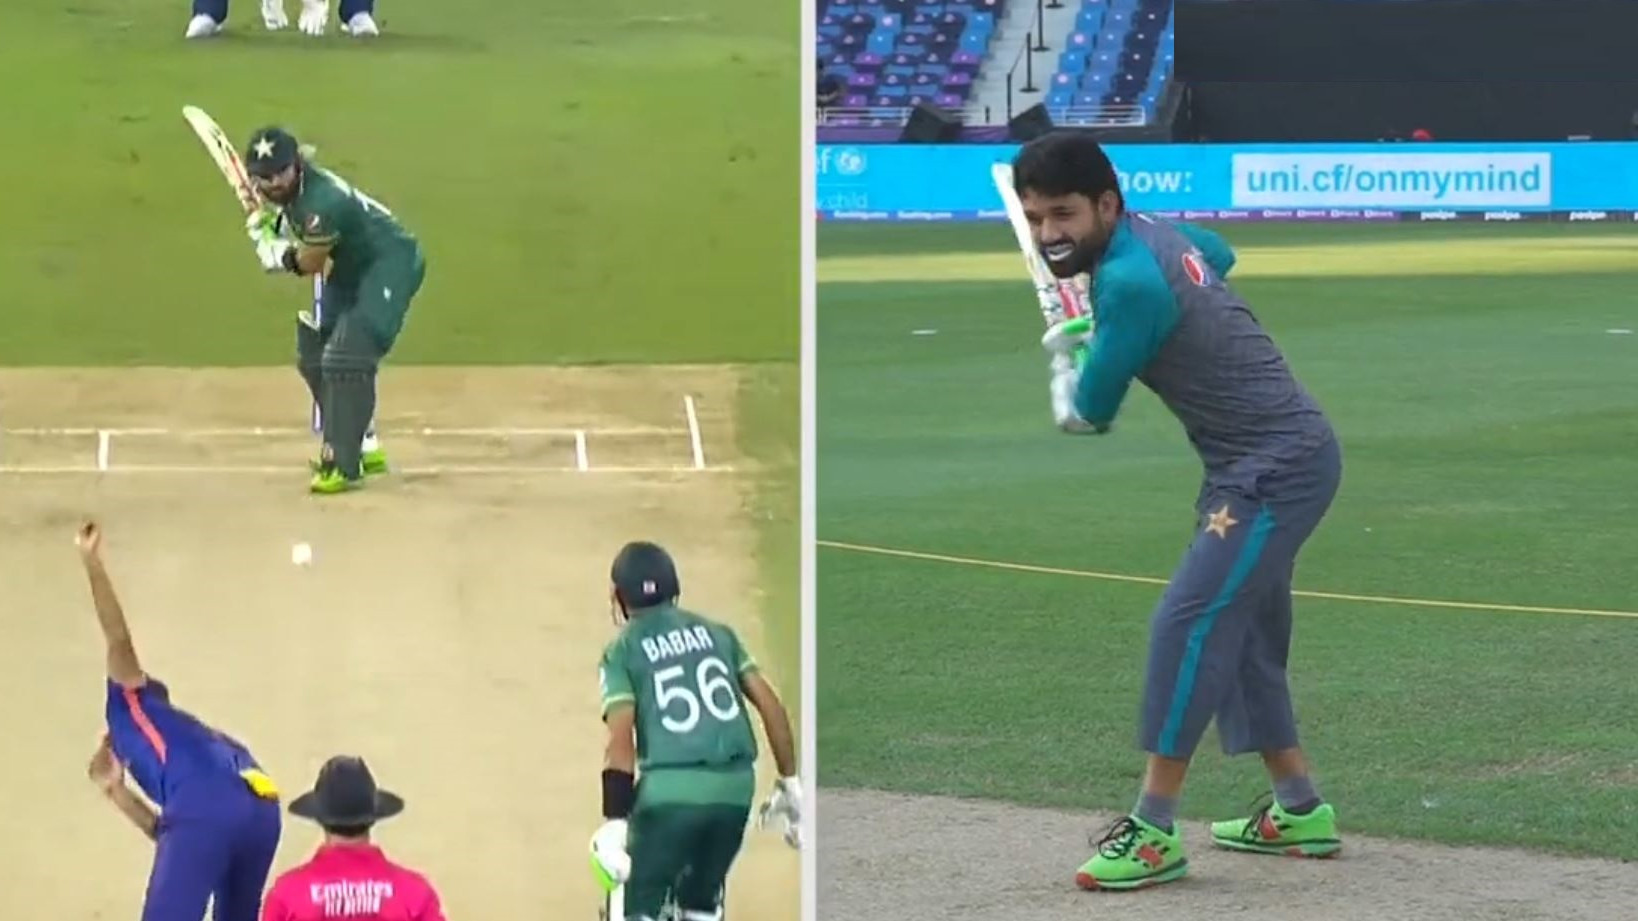 T20 World Cup 2021: WATCH- Mohammad Rizwan hitting the shots v India that he visualized before the match